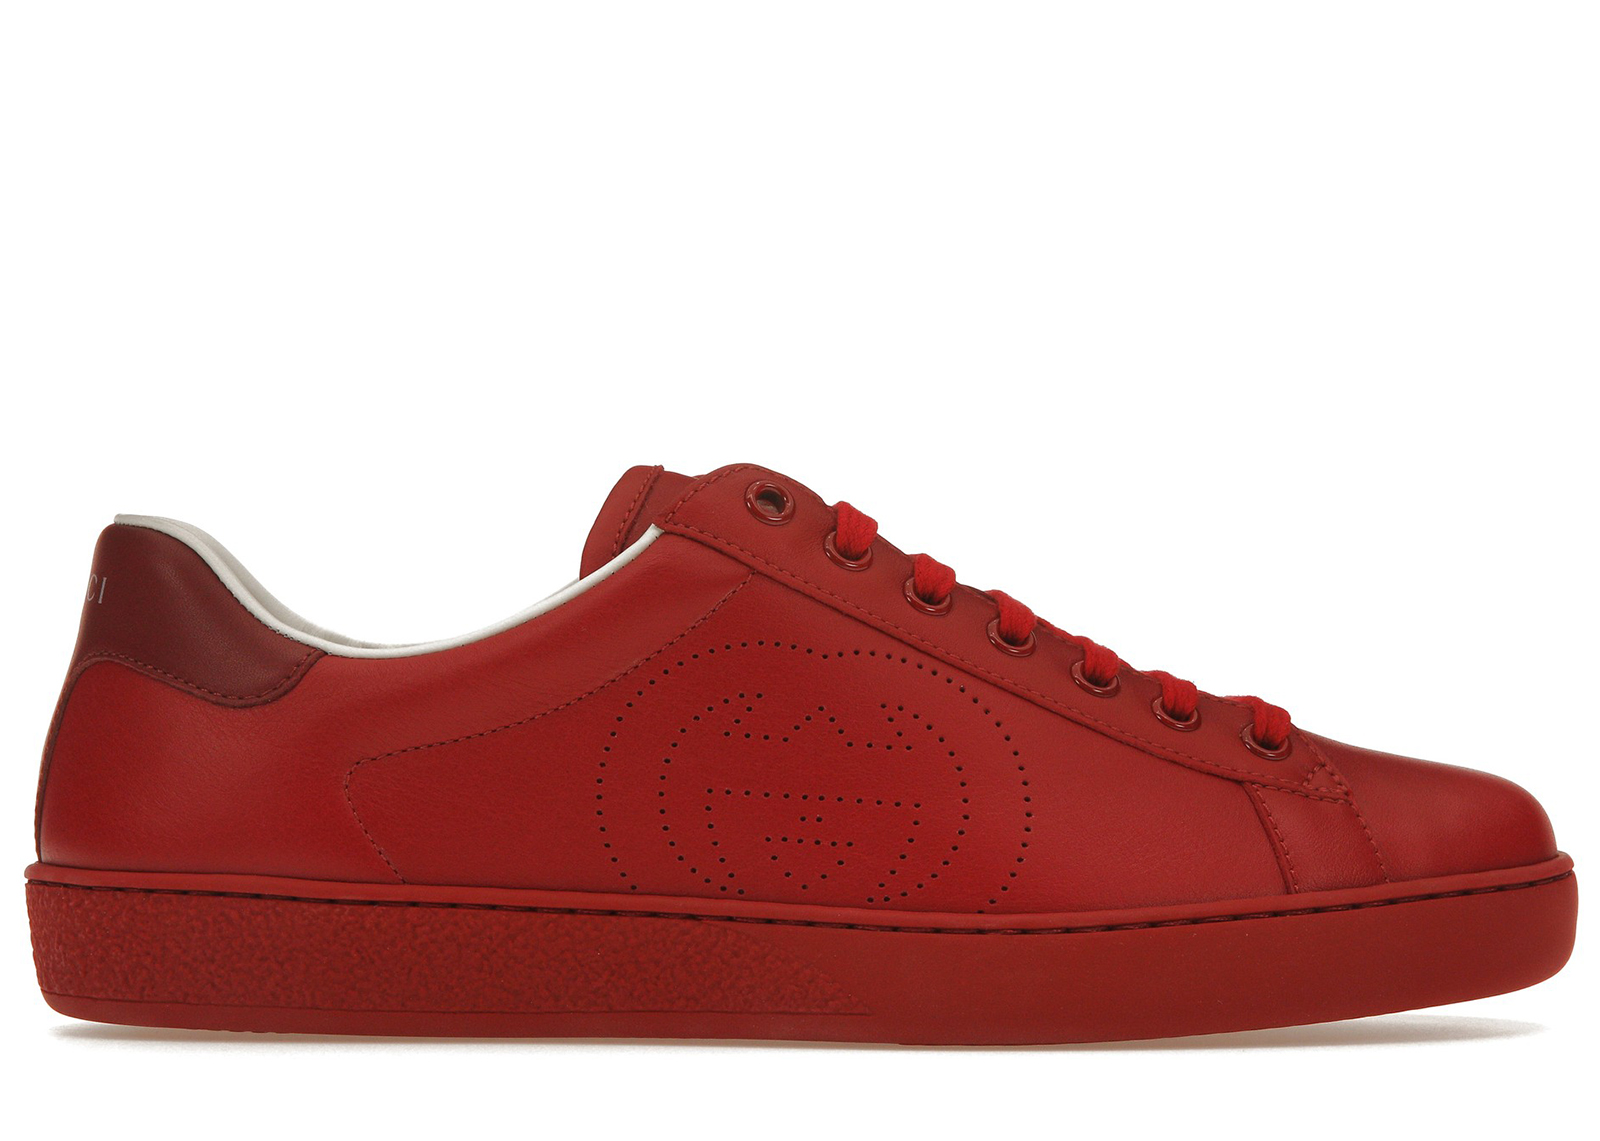 Gucci Ace Perforated Interlocking G Red Men's - _599147 AYO70 6463